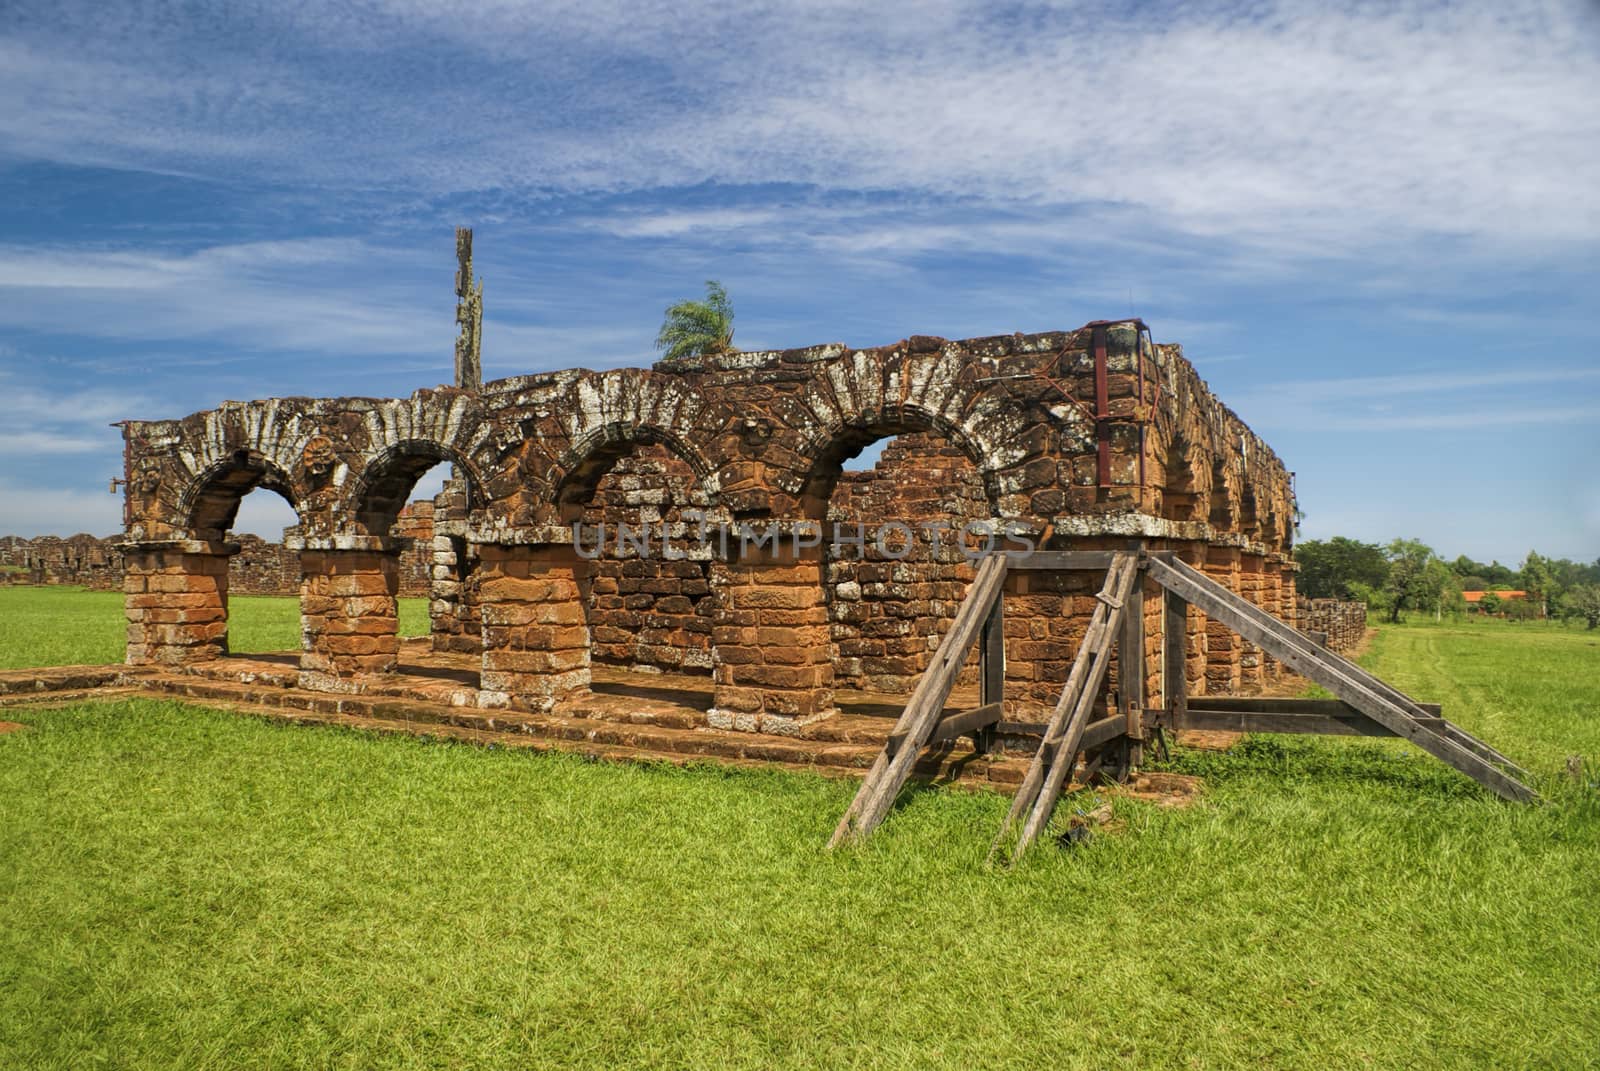 Picturesque Encarnacion and jesuit ruins in Paraguay, south America